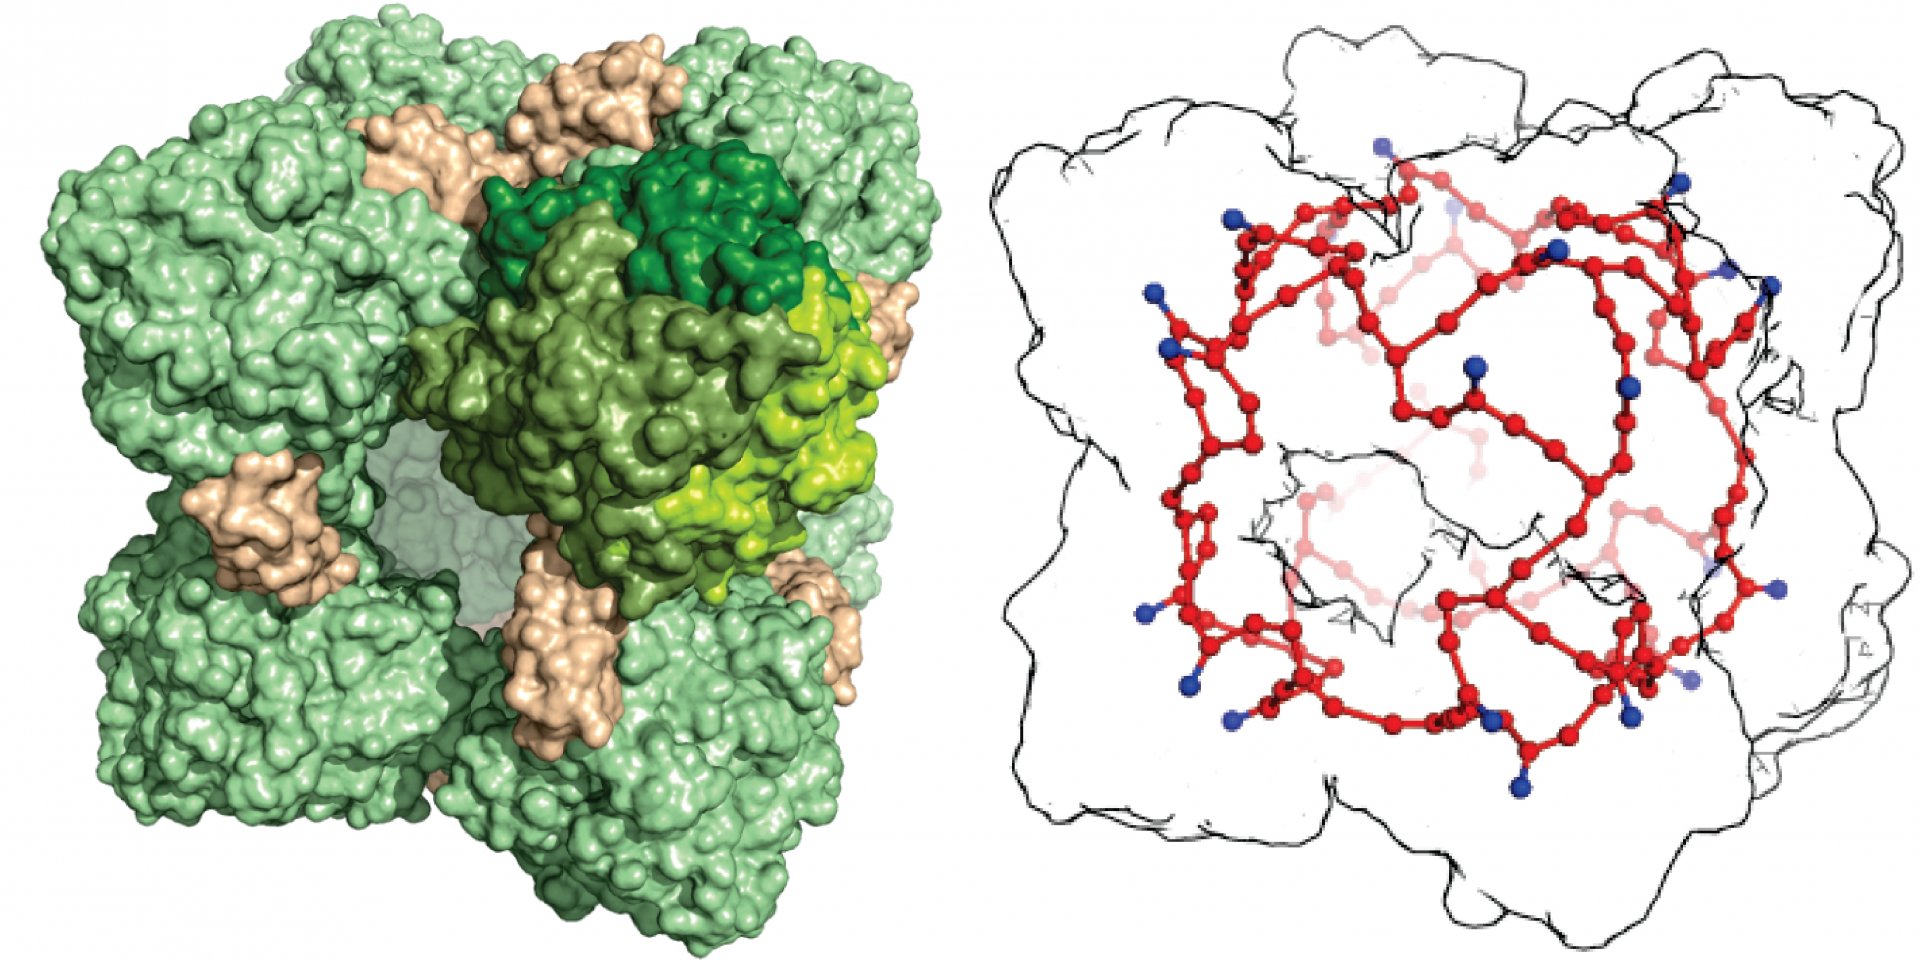 Different depictions of the HDH complex (Left: under the electron microscope; middle: crystal structure of HDH; right: Heme group wiring depicted in red. (© Akram et al., Sci. Adv. 2019;5:eaav4310; 17 April 2019)